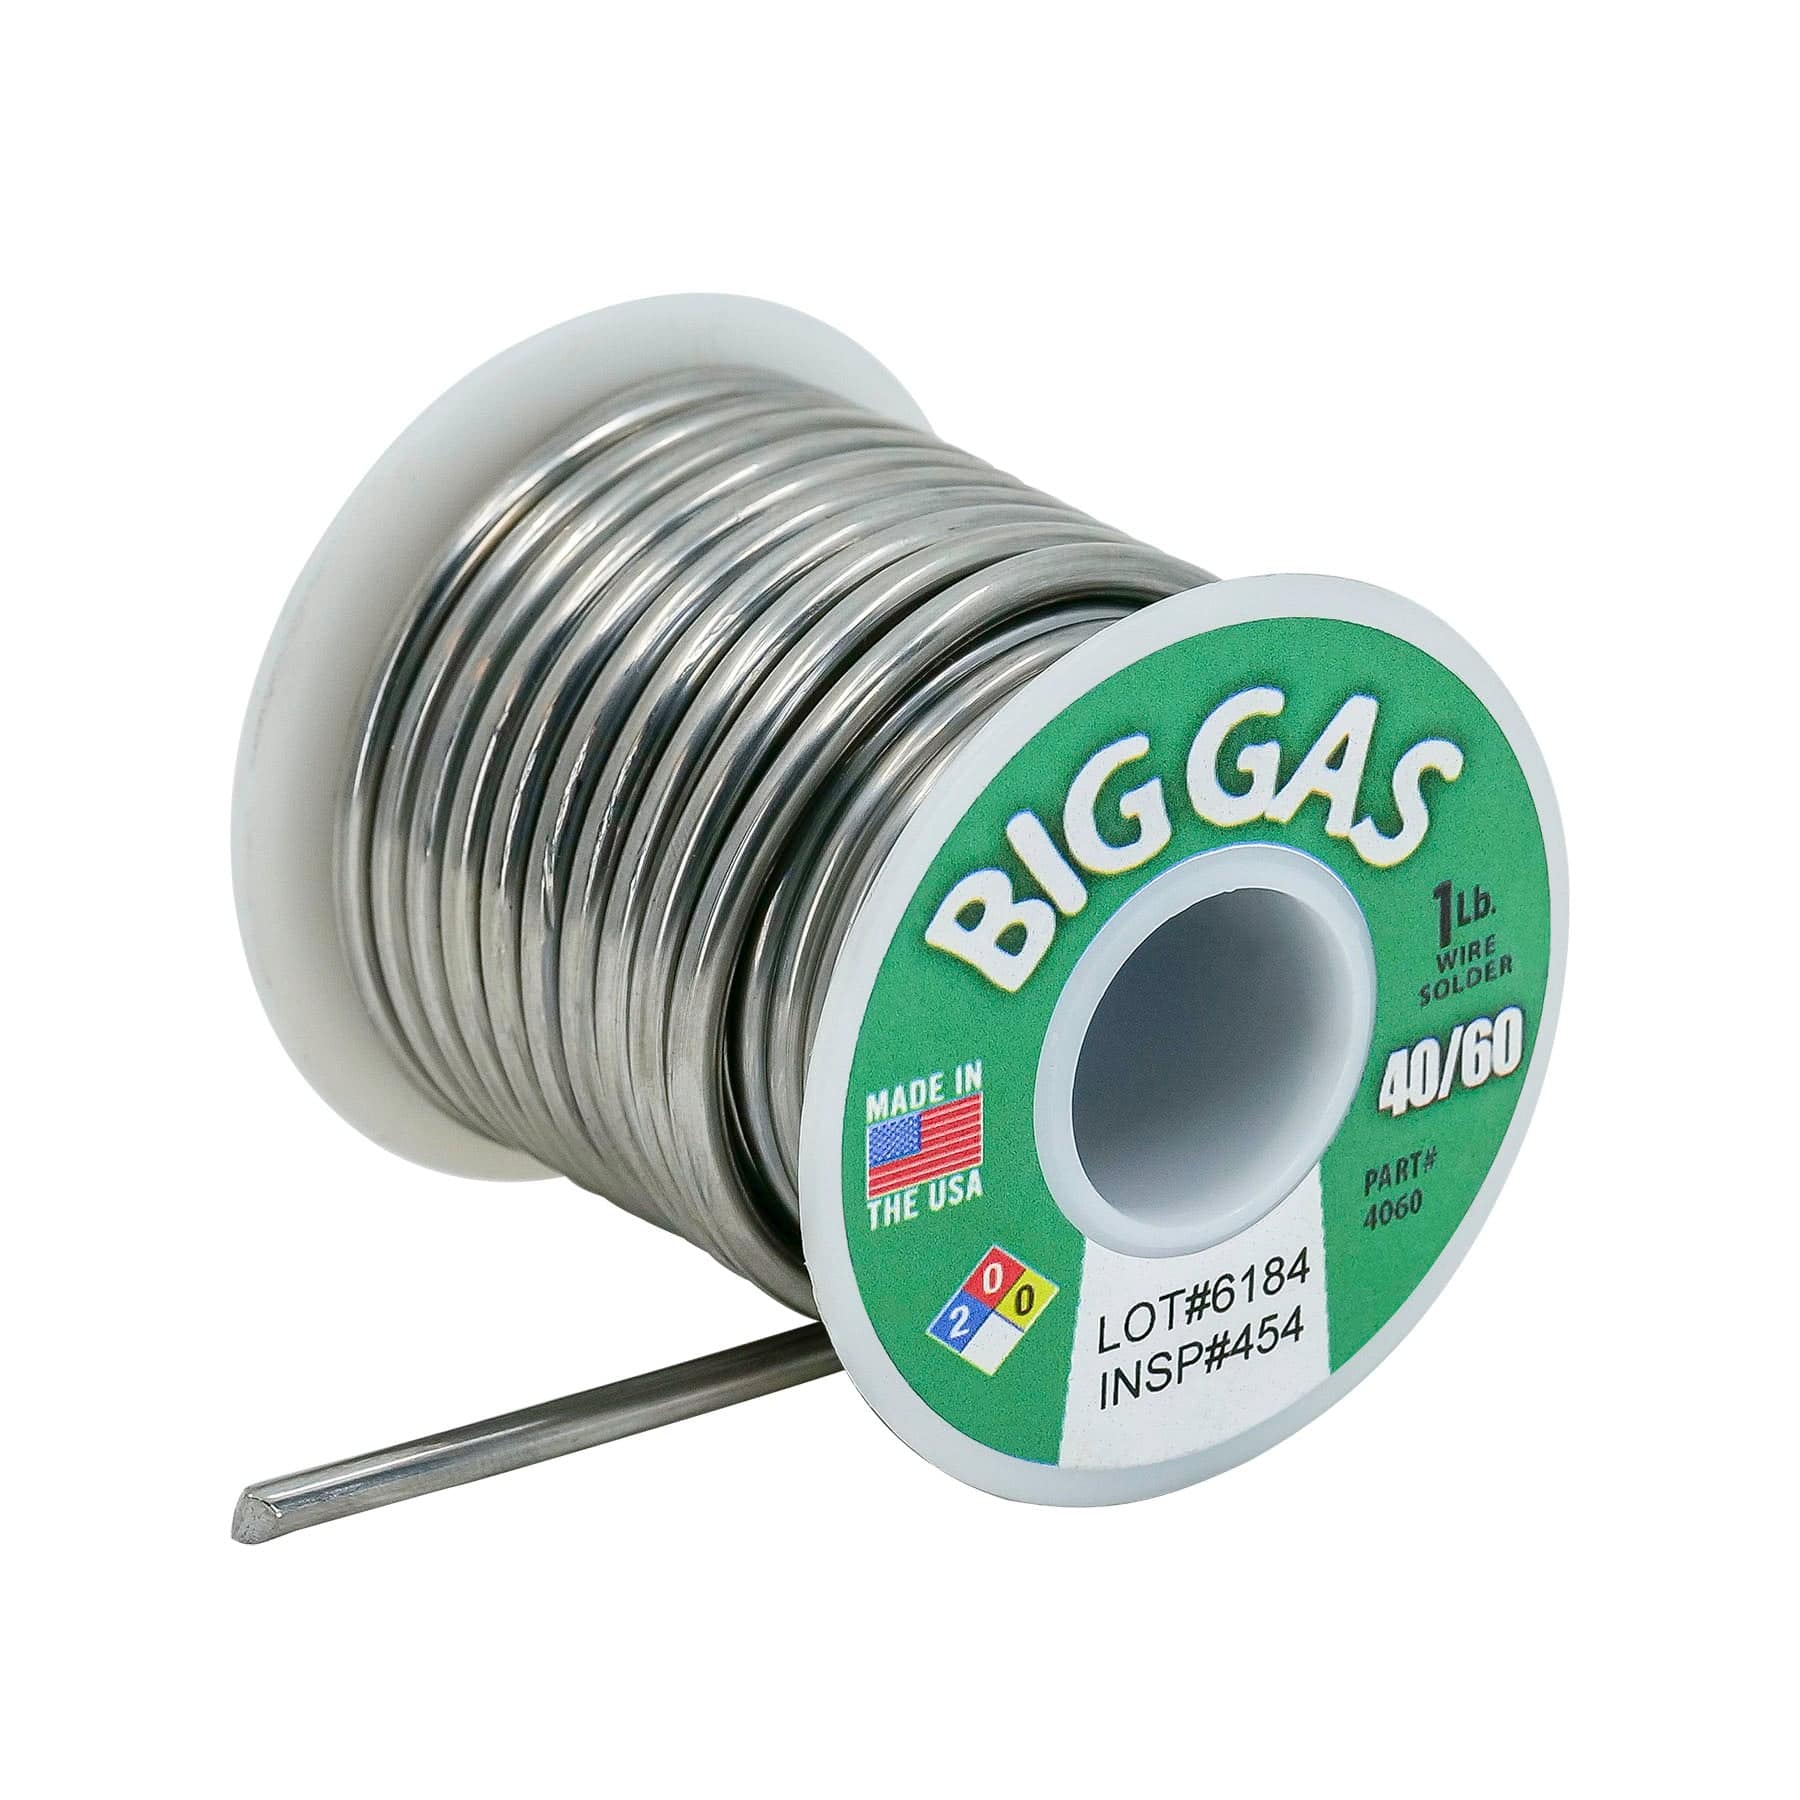 Big Gas Silver Lead-Free Solder - 1 Lb. Spool - Made in The USA